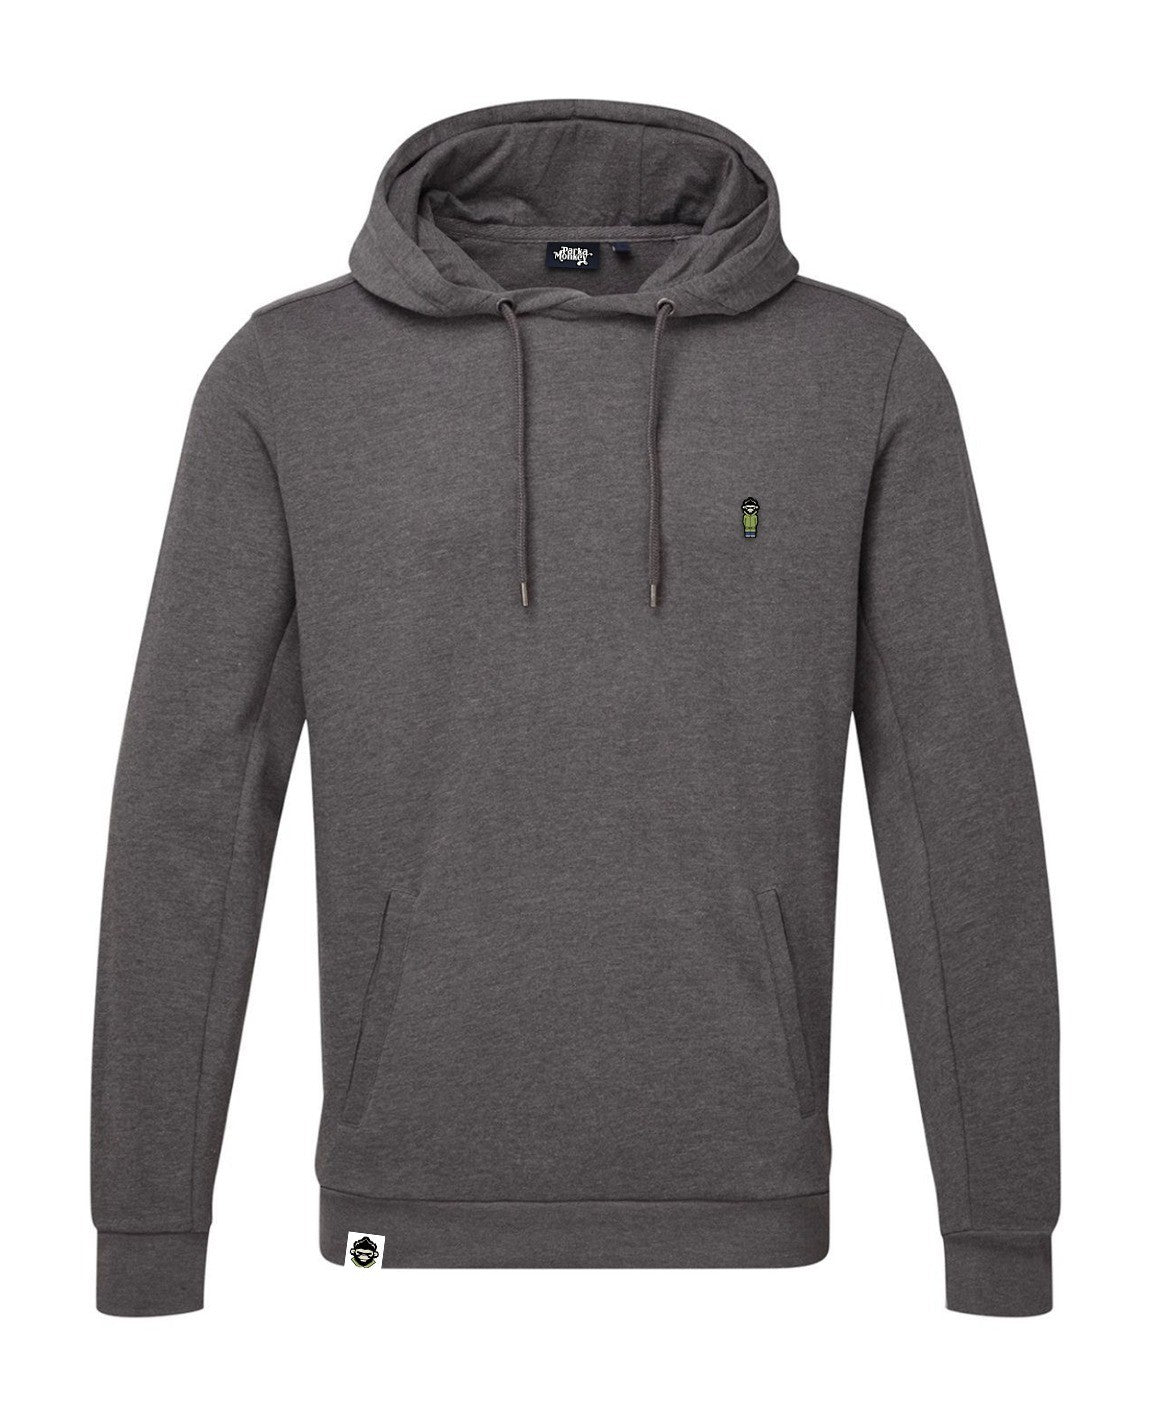 ***COMING SOON*** Classic Light Hoodie - Charcoal - ParkaMonkey clothing 